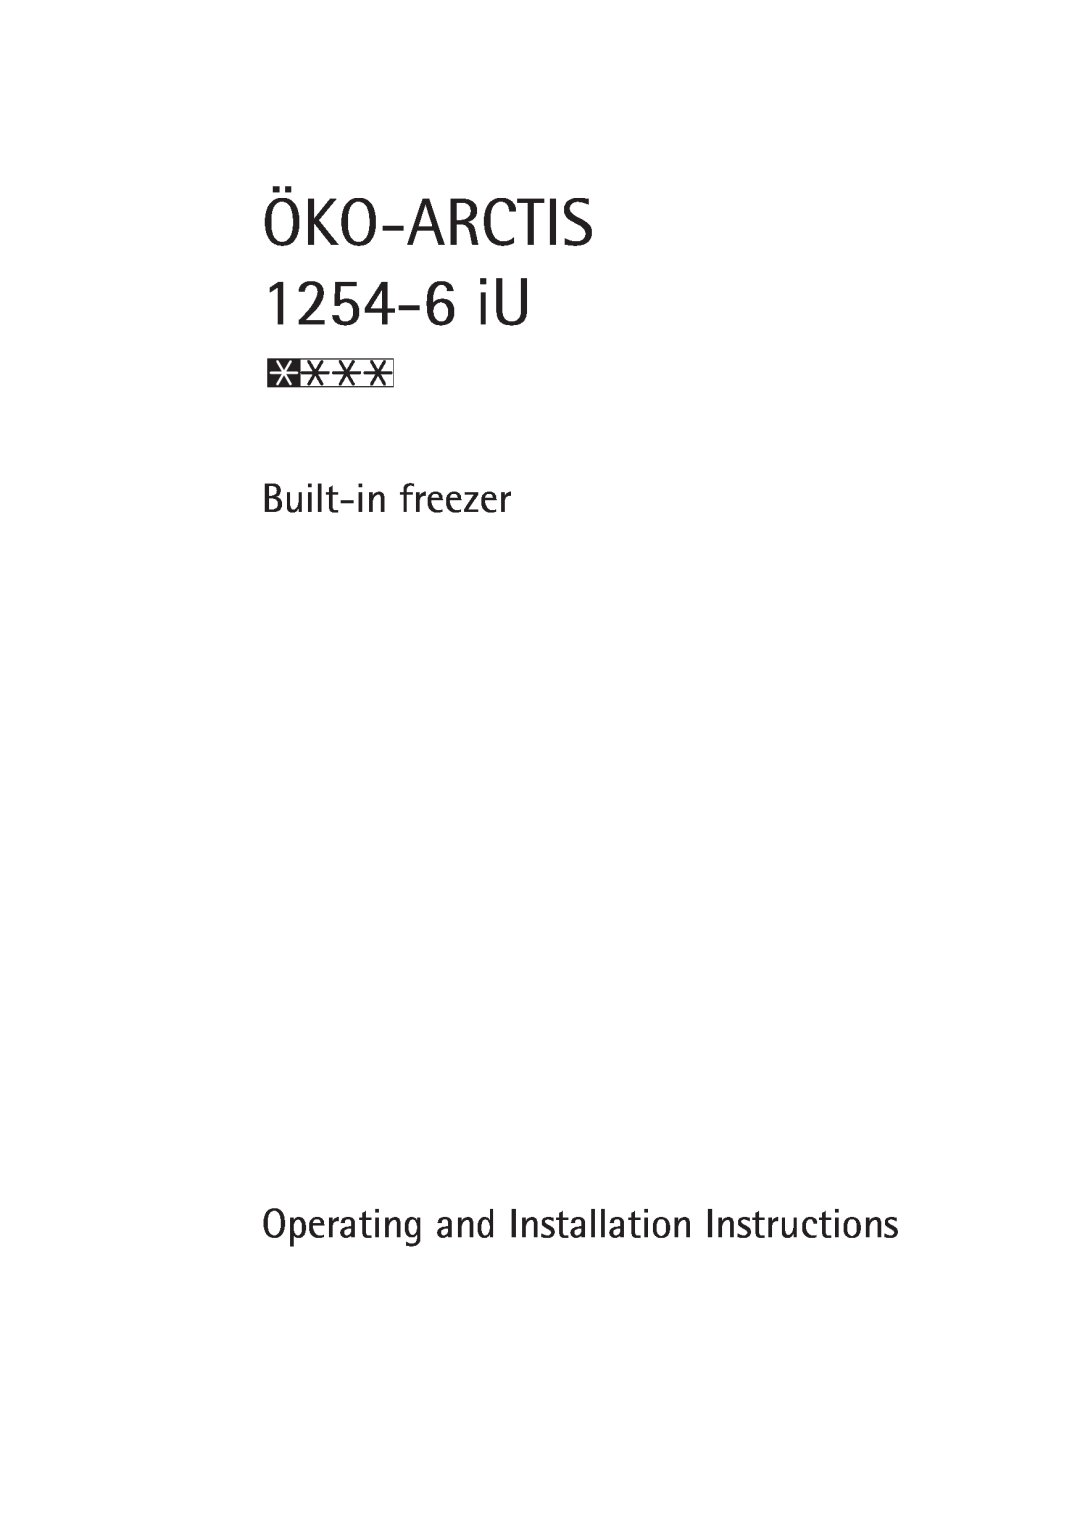 Electrolux installation instructions ÖKO-ARCTIS 1254-6 iU, Built-in freezer, Operating and Installation Instructions 